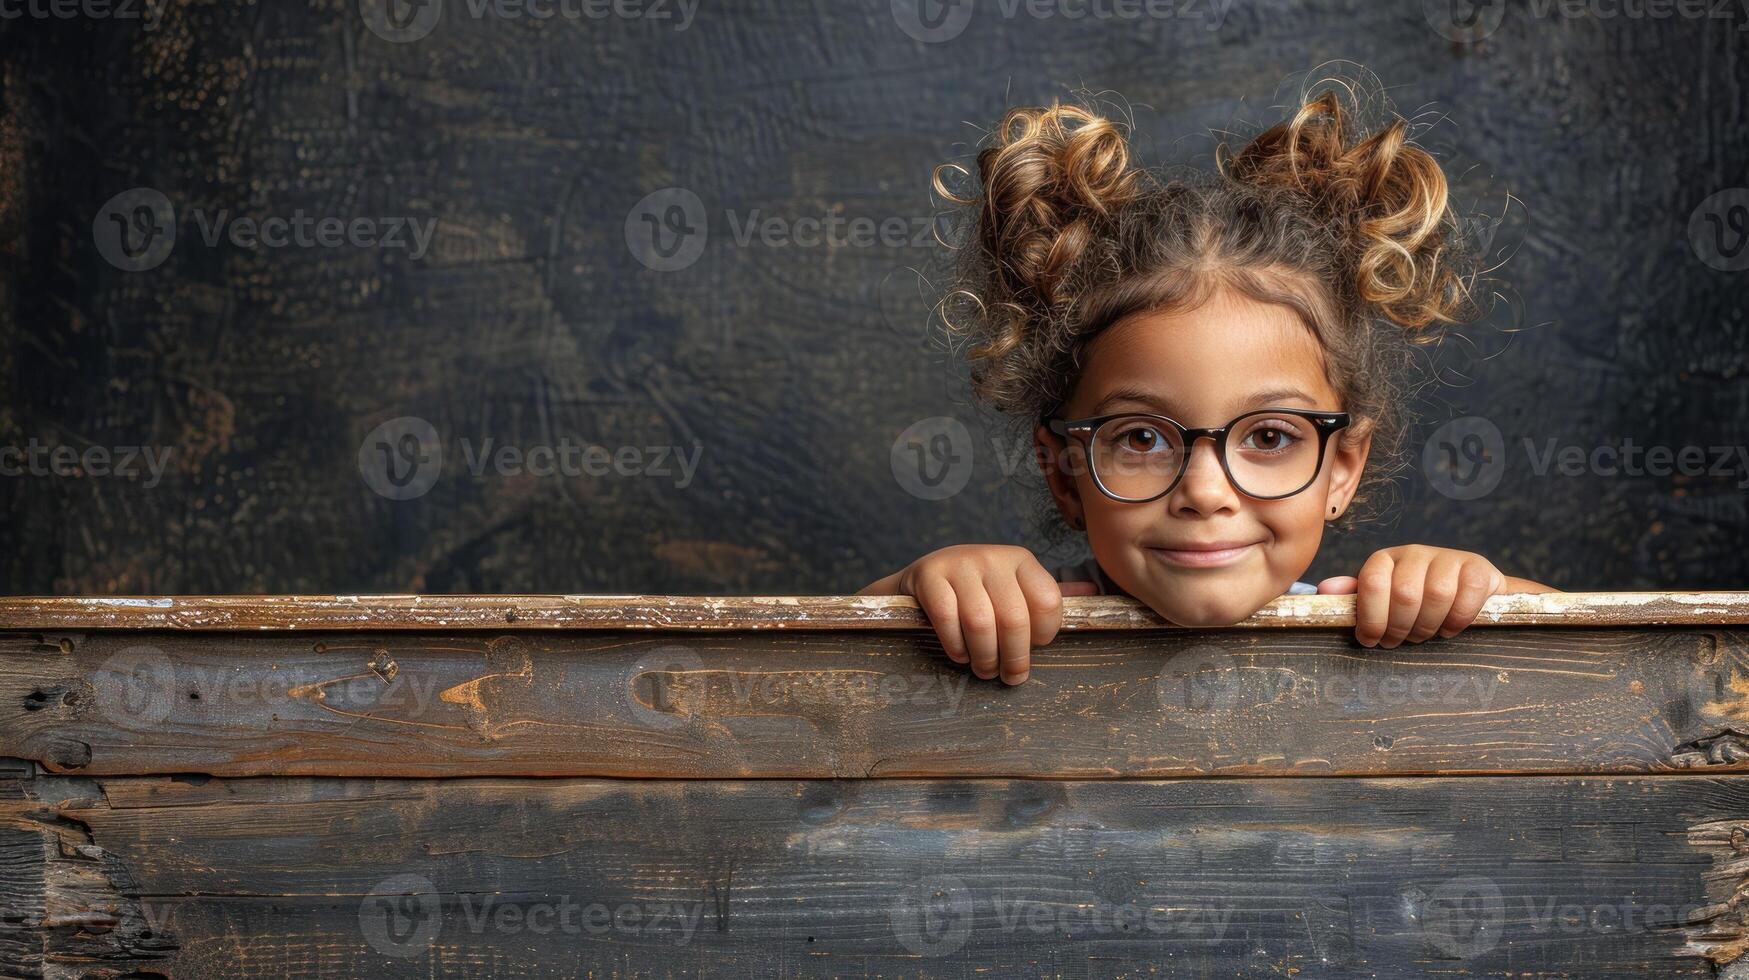 A young female child wearing glasses looks over a wooden sign photo